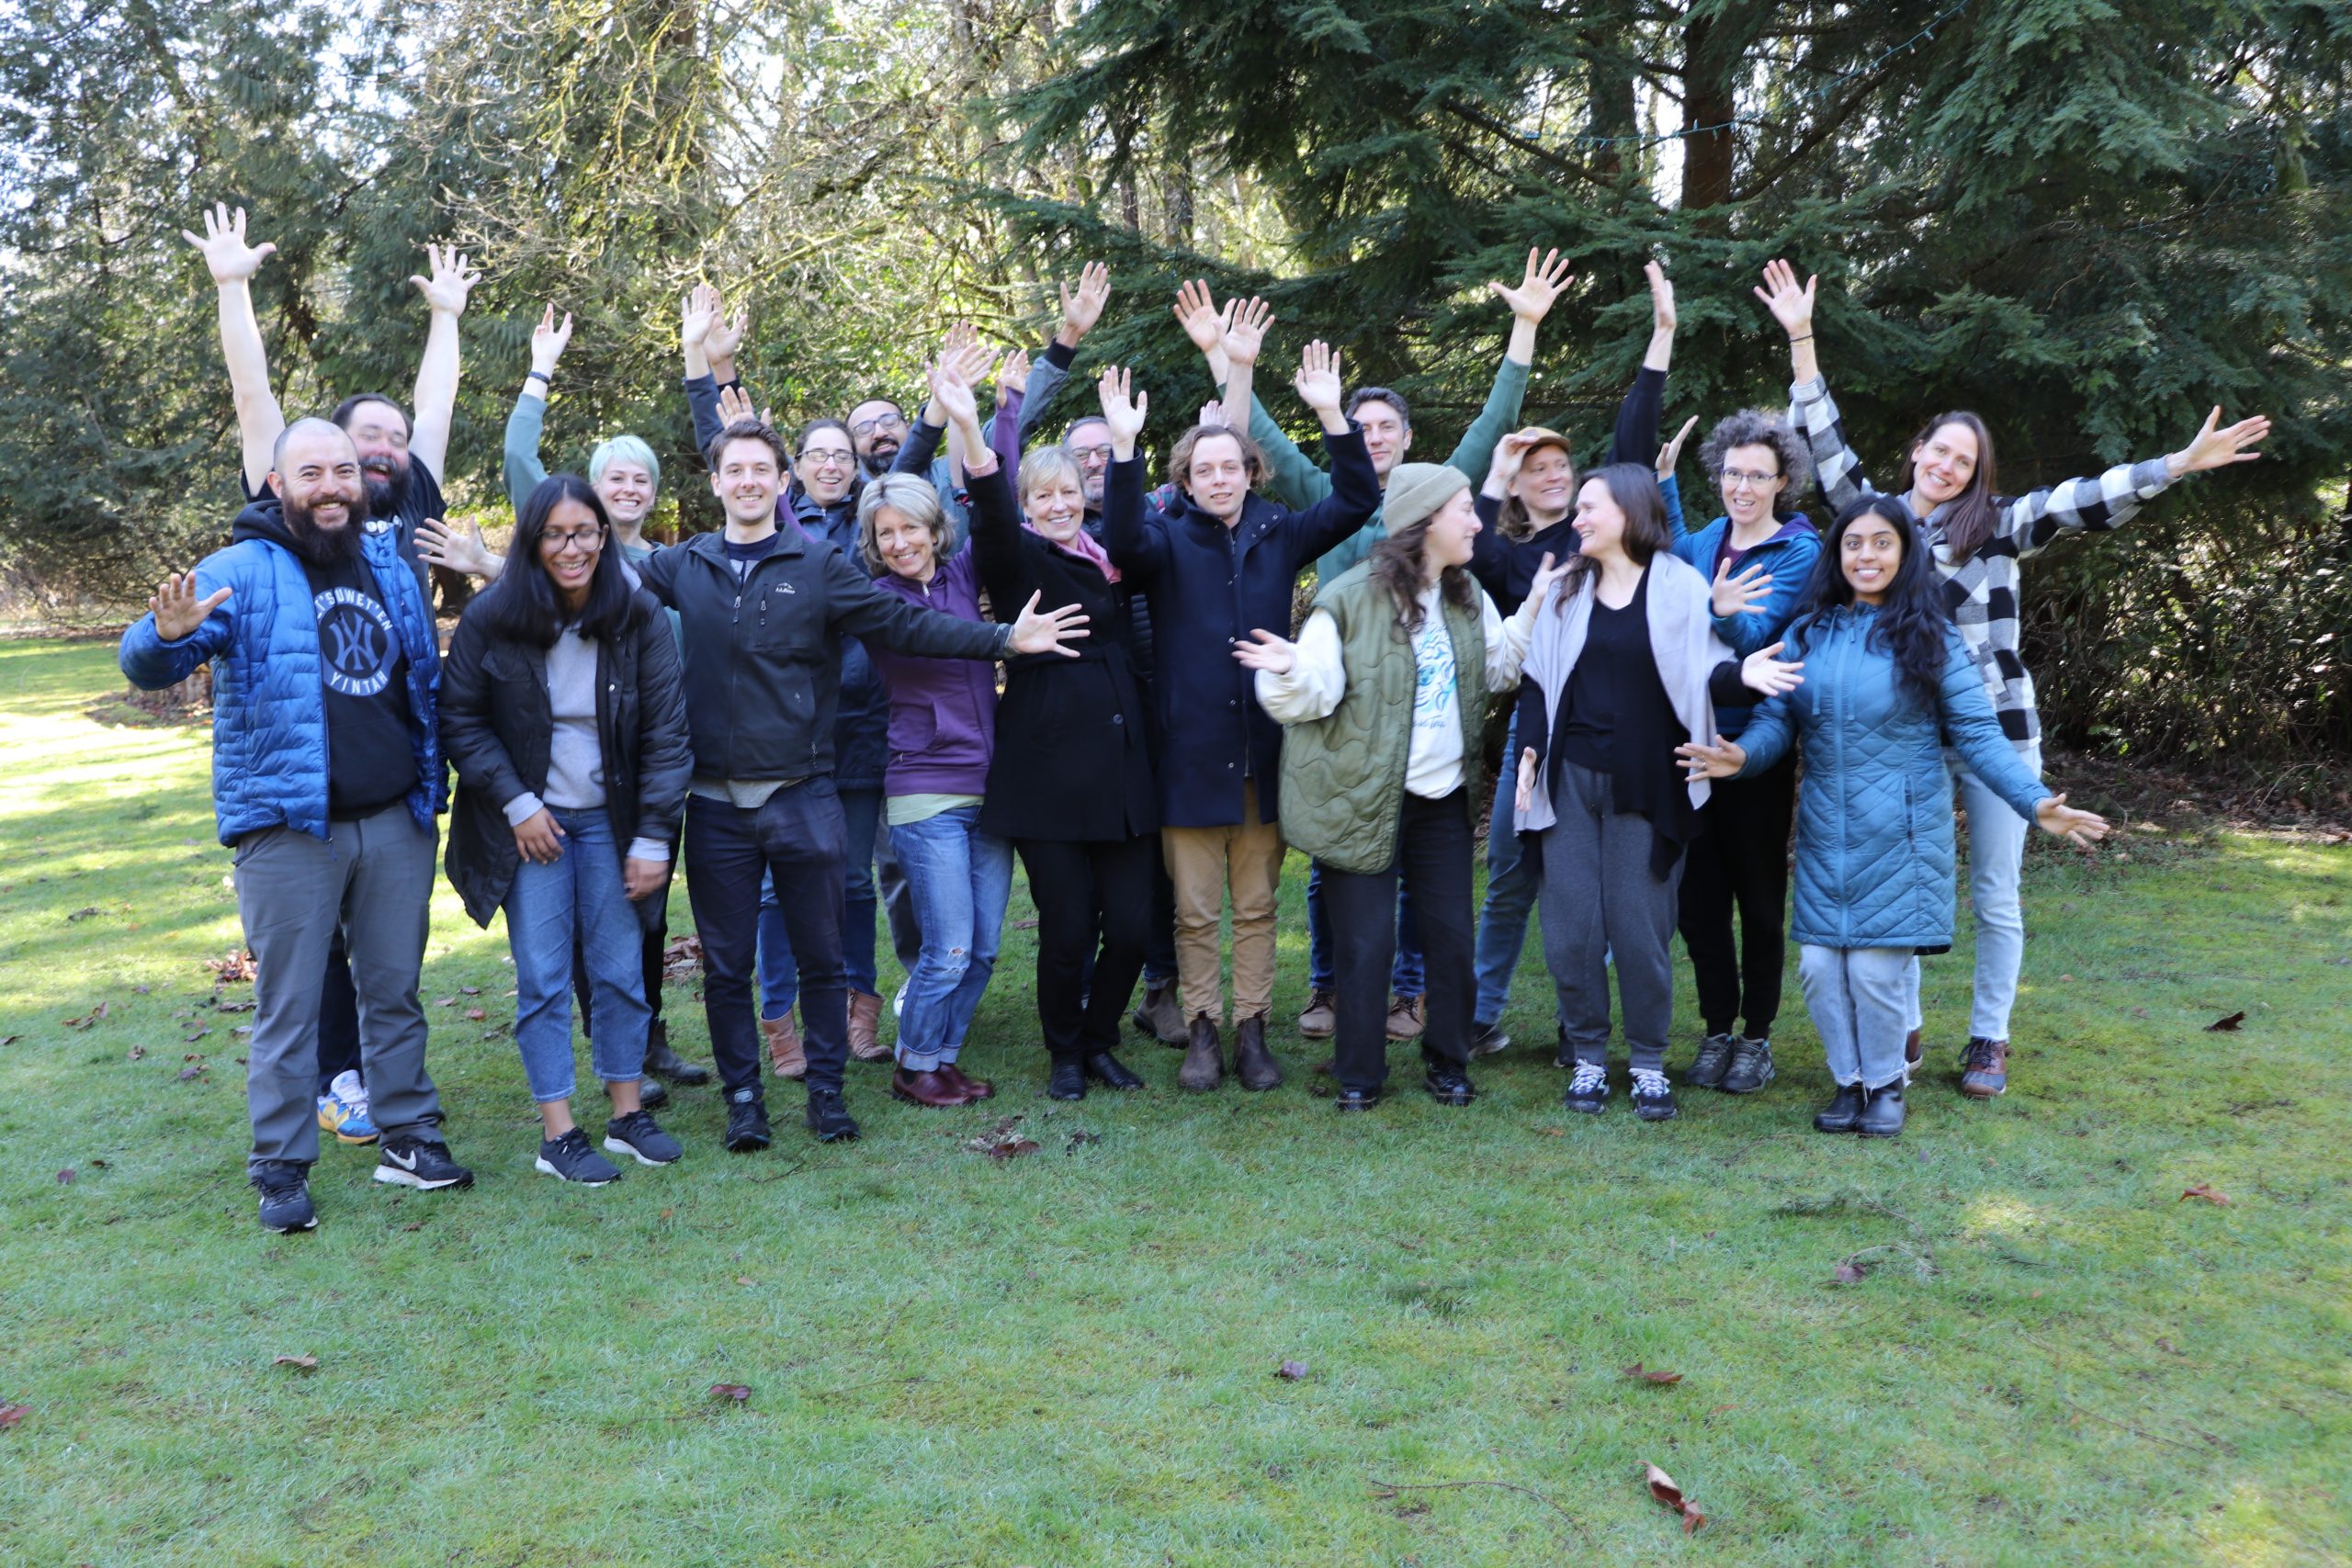 Group of about 20 people standing together on a lawn with their hands in the air and smiling for the camera with trees in the background.